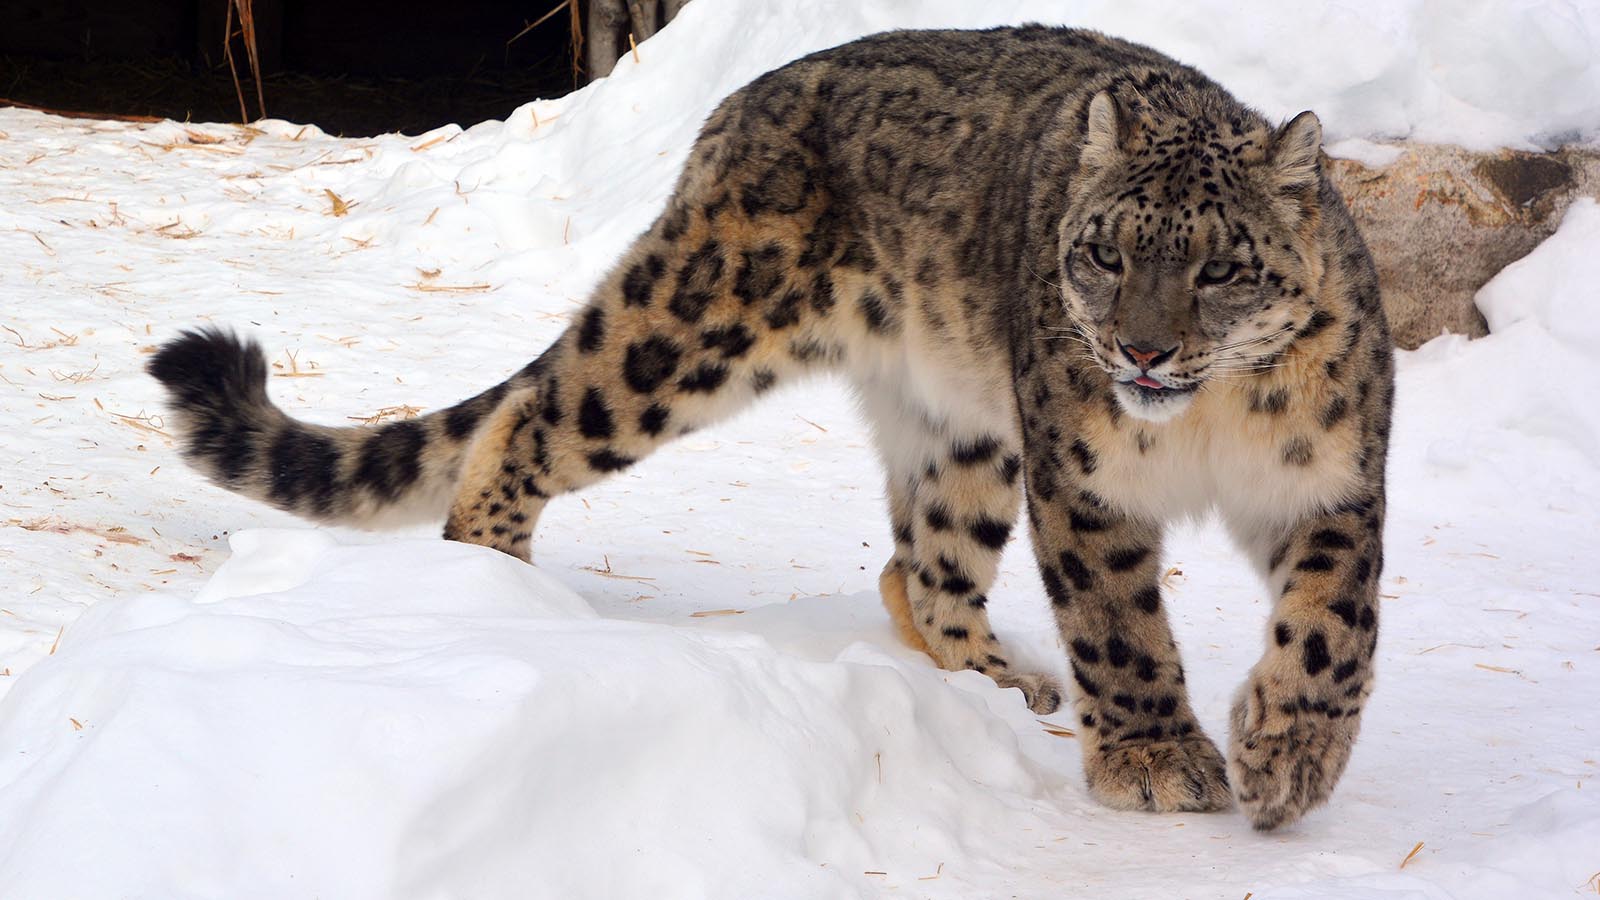 The,Snow,Leopard,Is,A,Large,Cat,Native,To,The